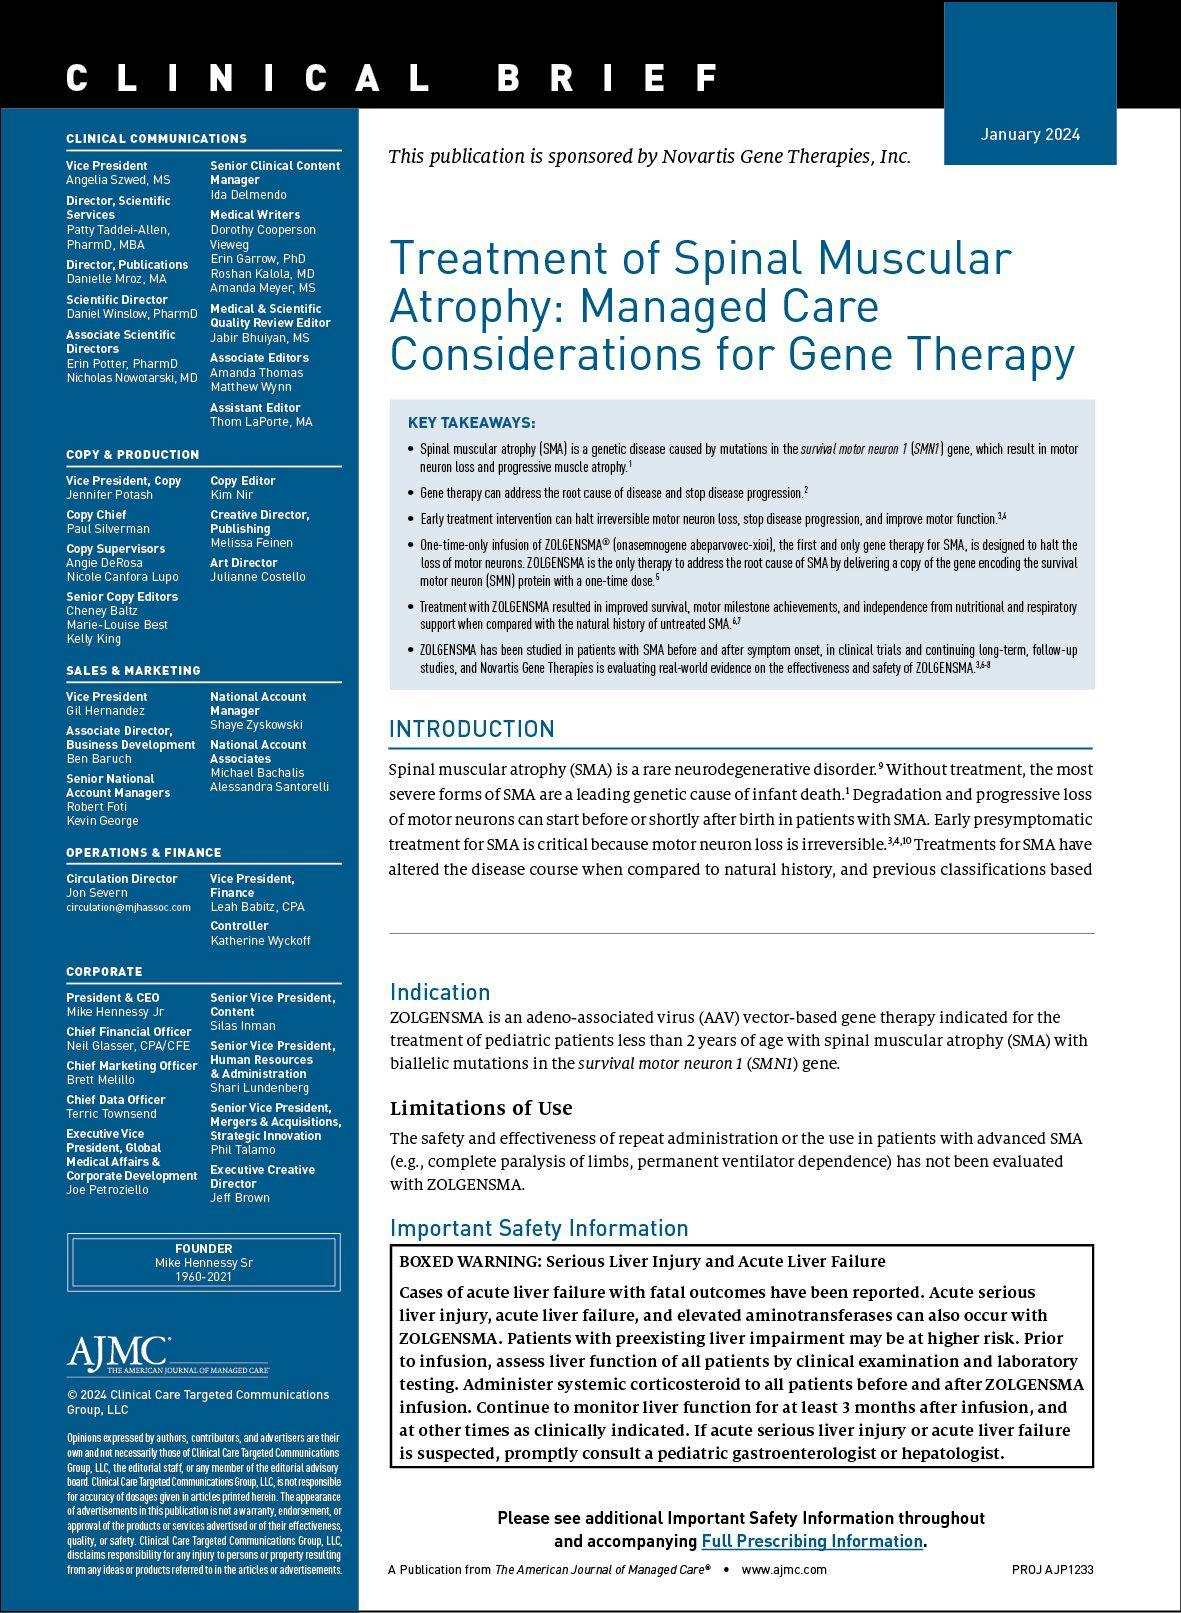 Treatment of Spinal Muscular Atrophy: Managed Care Considerations for Gene Therapy